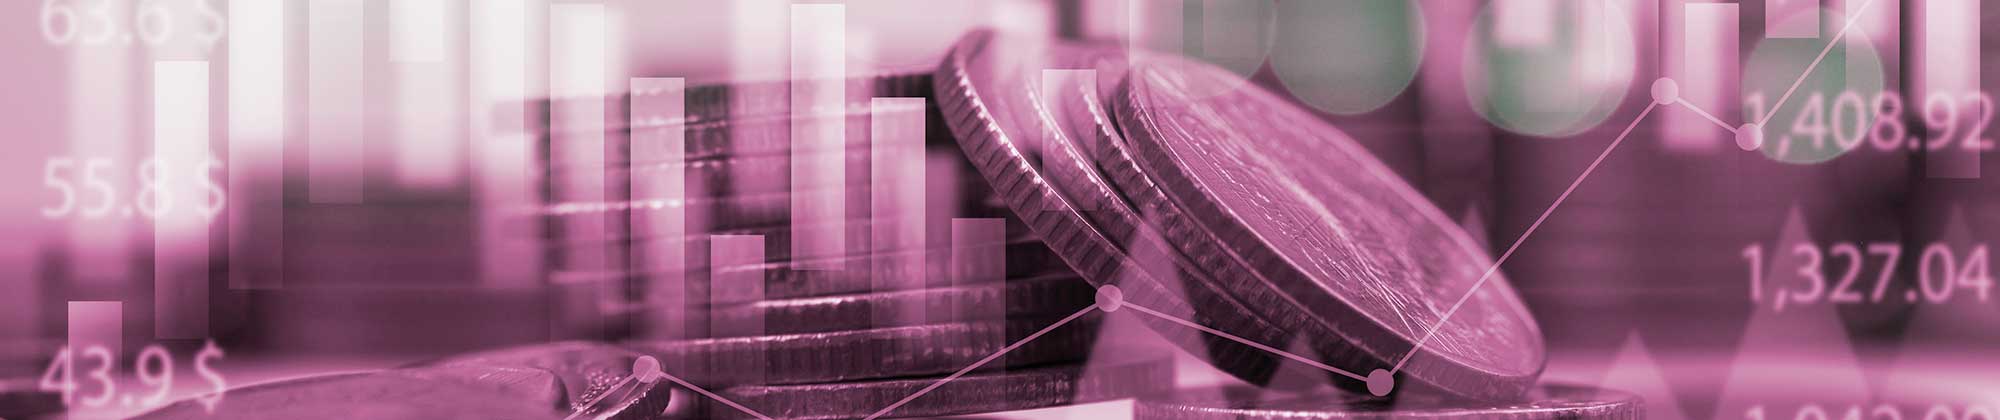 double exposure of money coins stacking with bar graph for financial and investment business concept